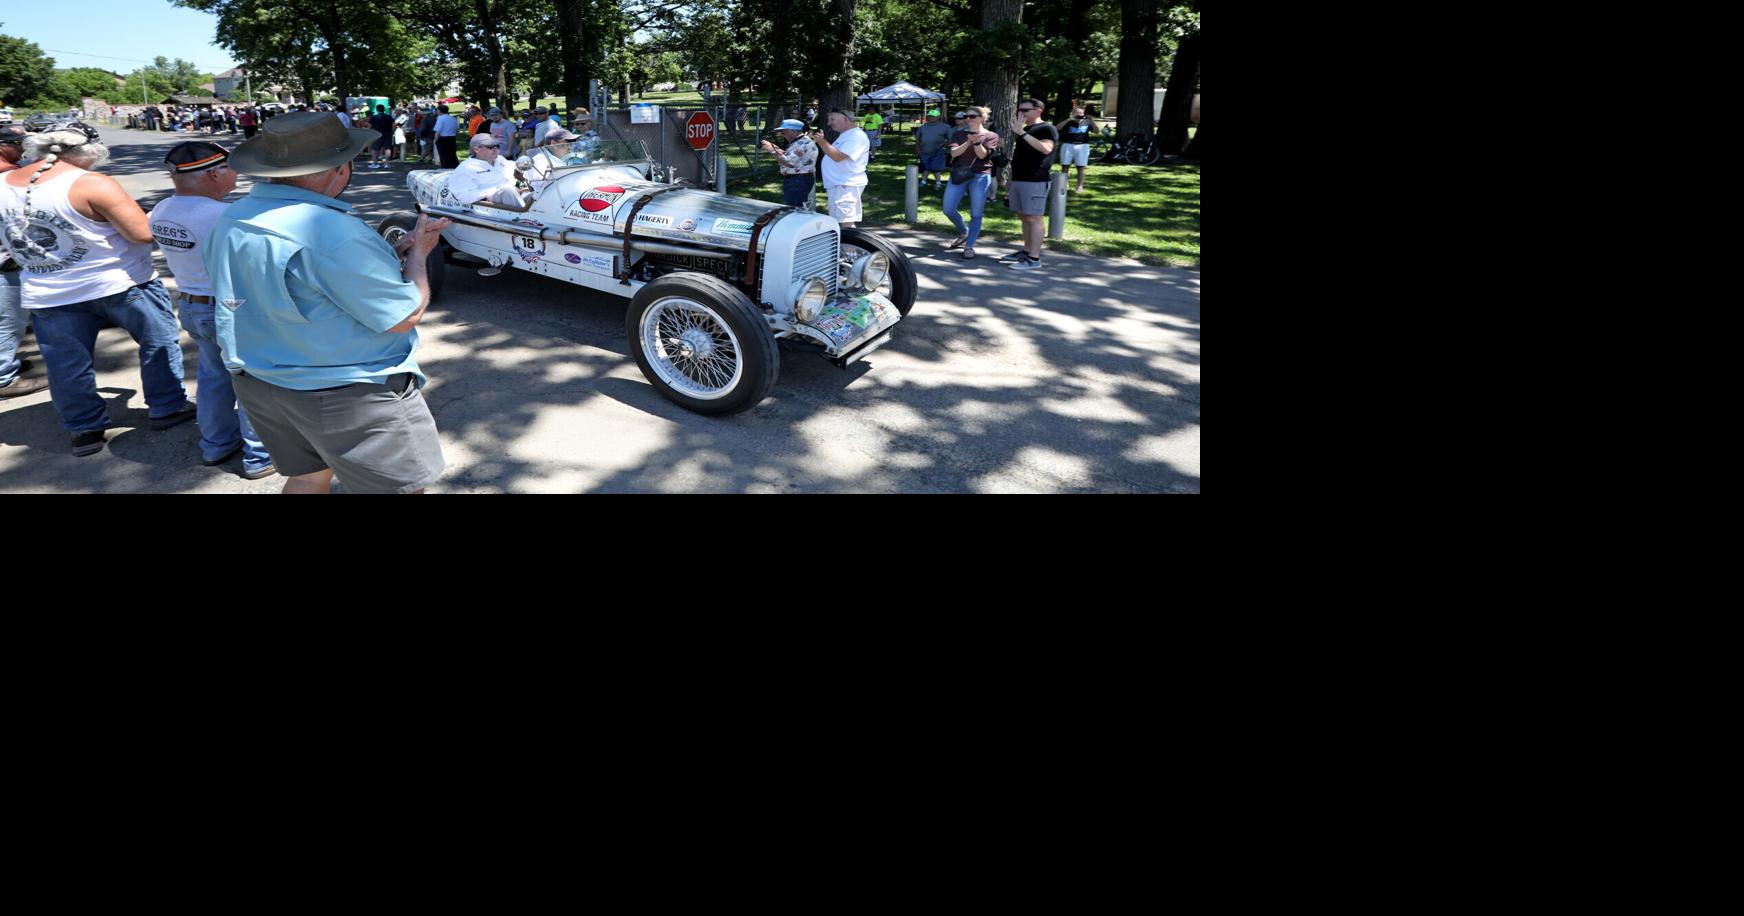 Watch now: Classic cars roll into Sun Prairie as pit stop in cross-country rally race | Local News